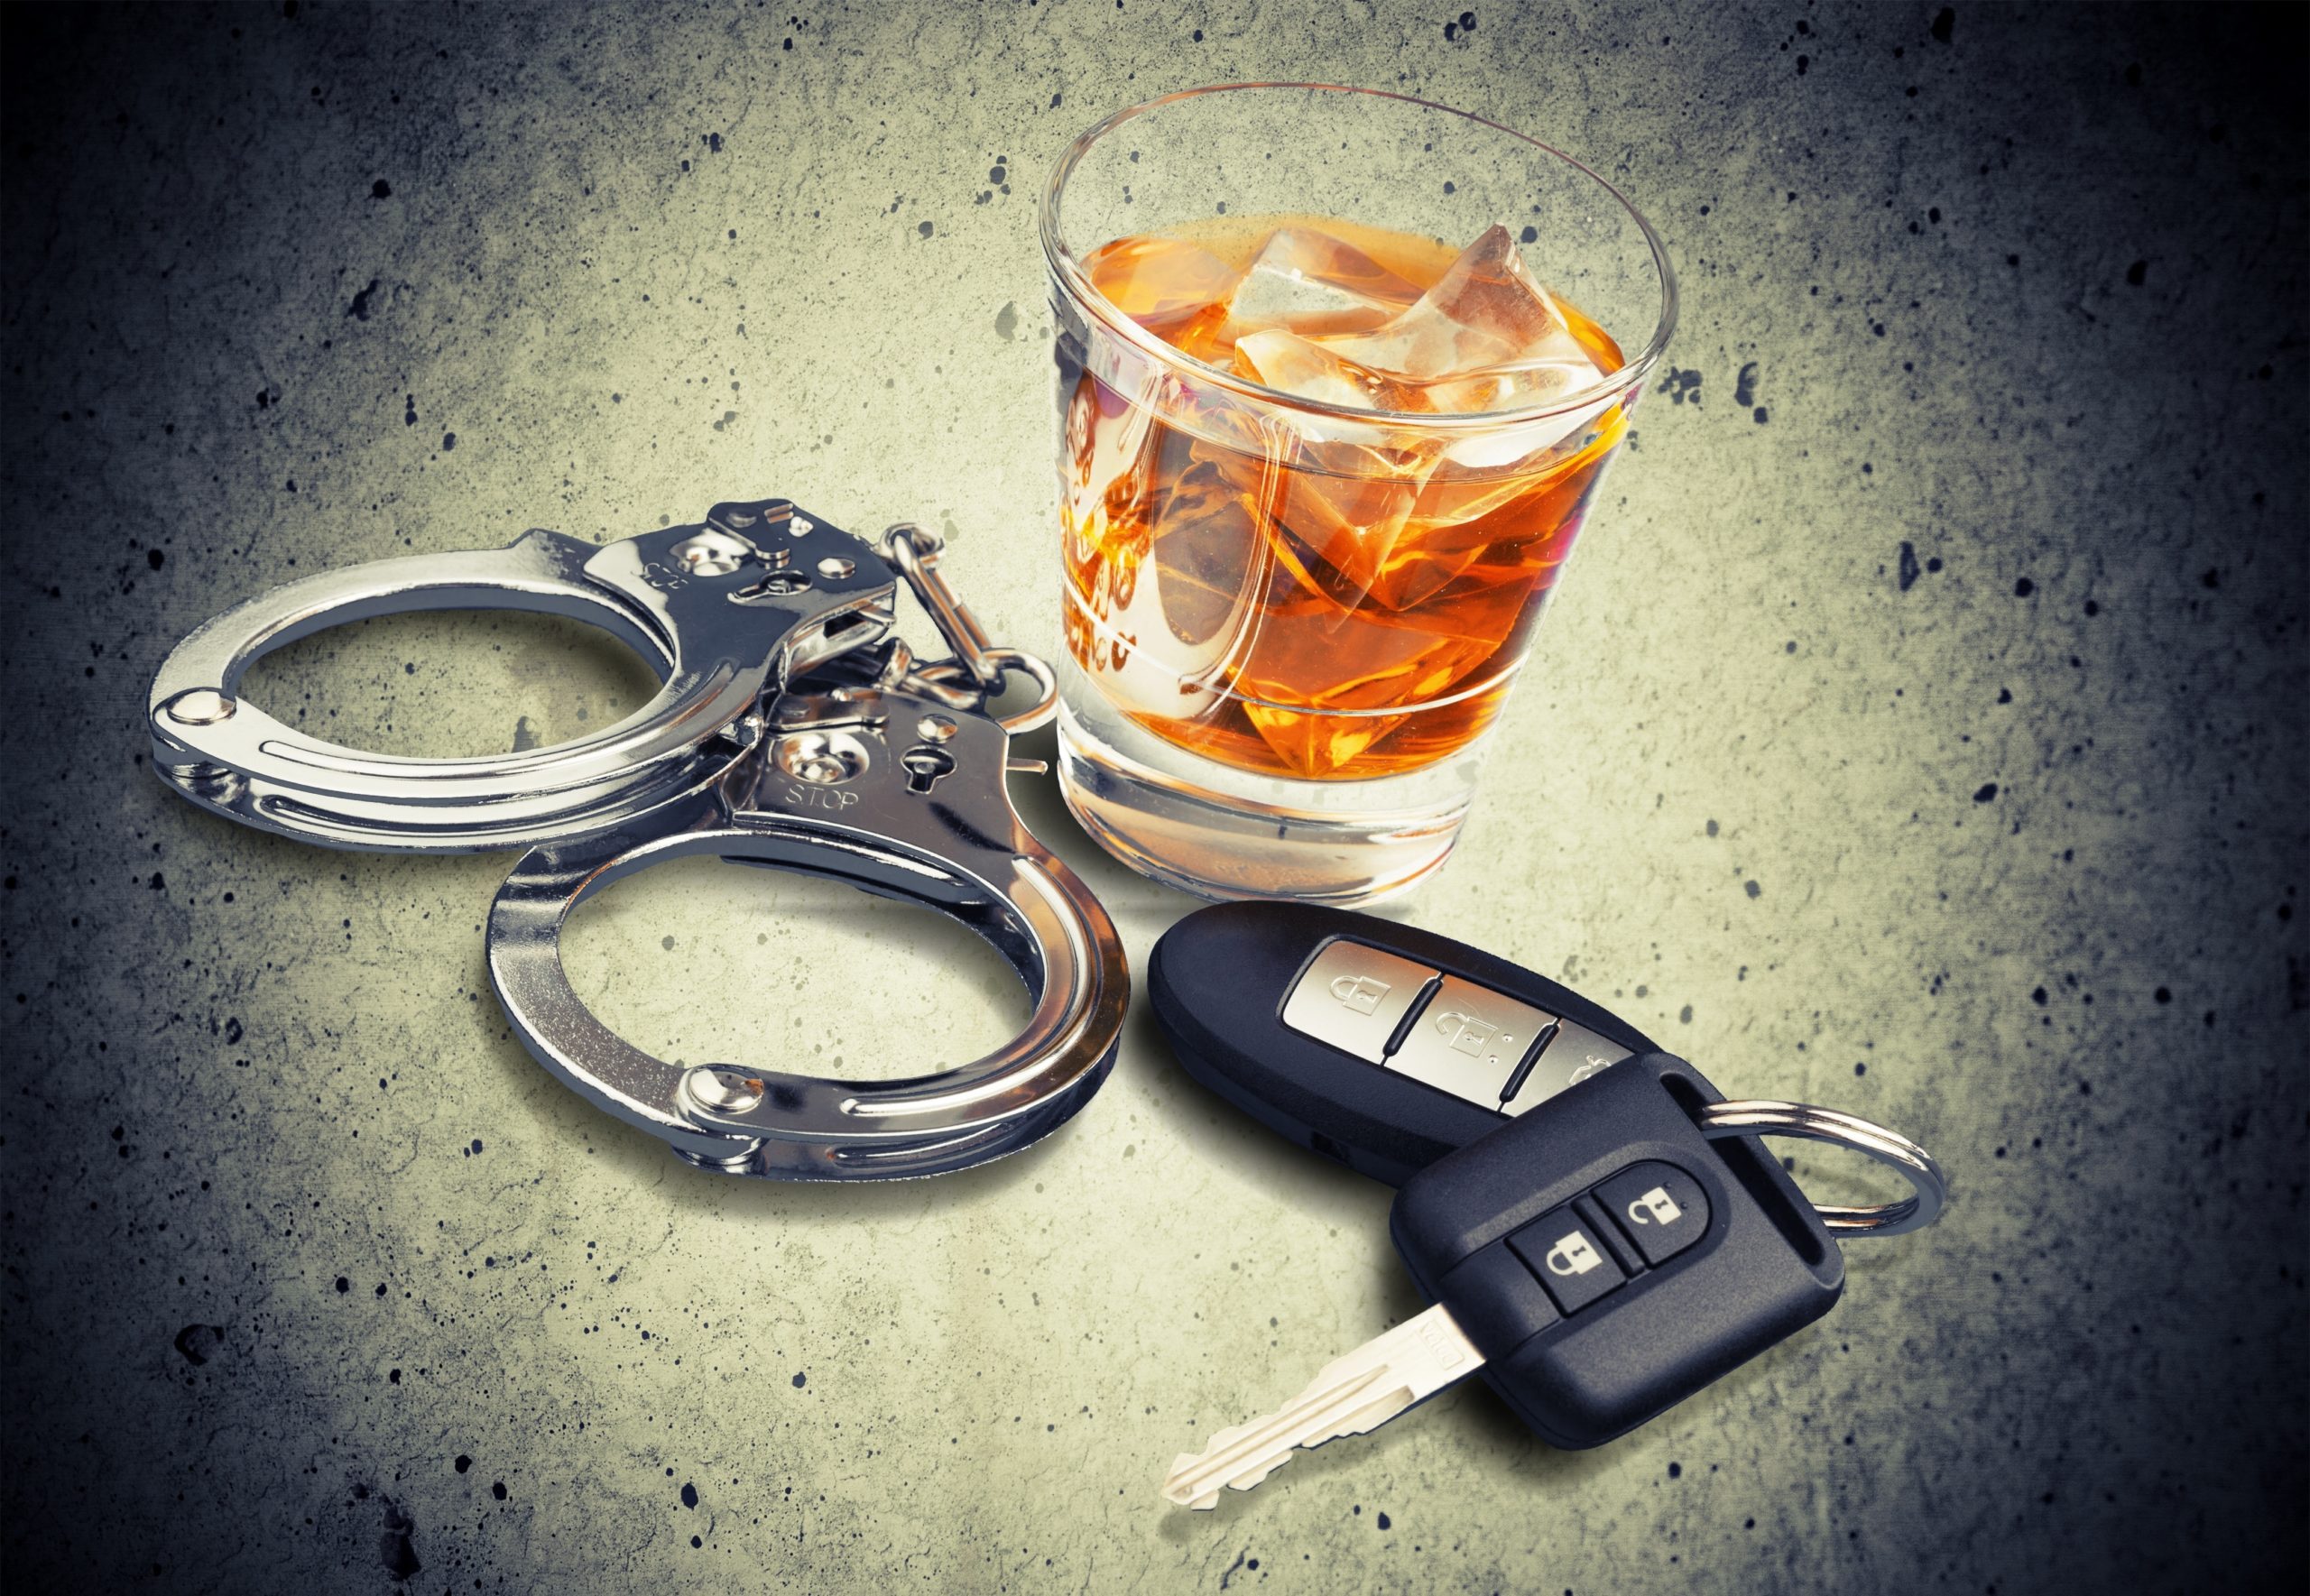 Basic Difference Between DUI and DWI